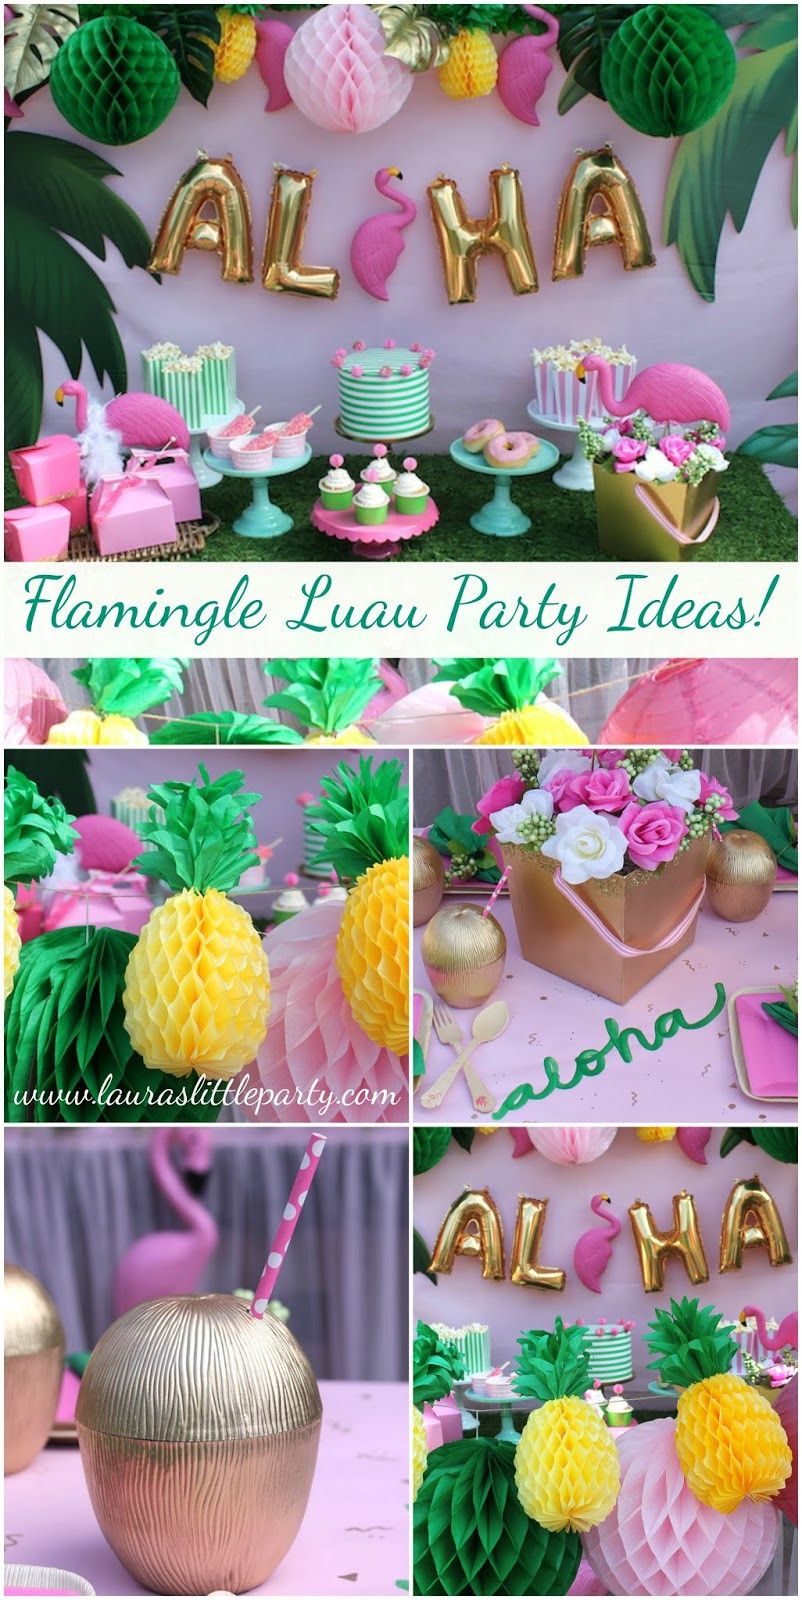 Summer Party Decorating Ideas
 Let s Flamingle Luau Summer Party Ideas LAURA S little